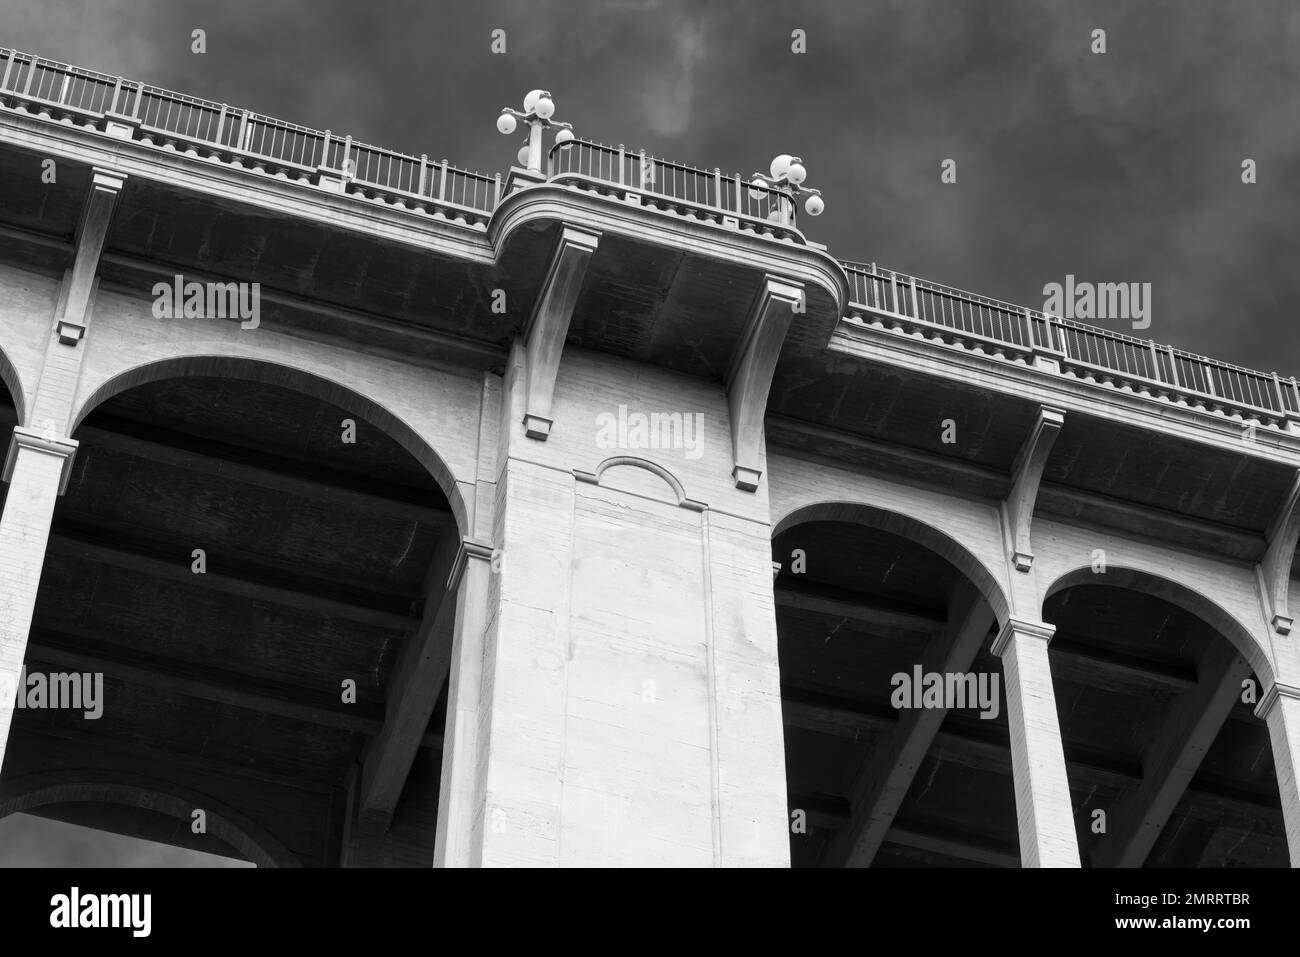 Colorado Street Bridge in Pasadena, California, USA. Built in 1913 it is on the National Register of Historic Places. It has been designated a Nationa Stock Photo